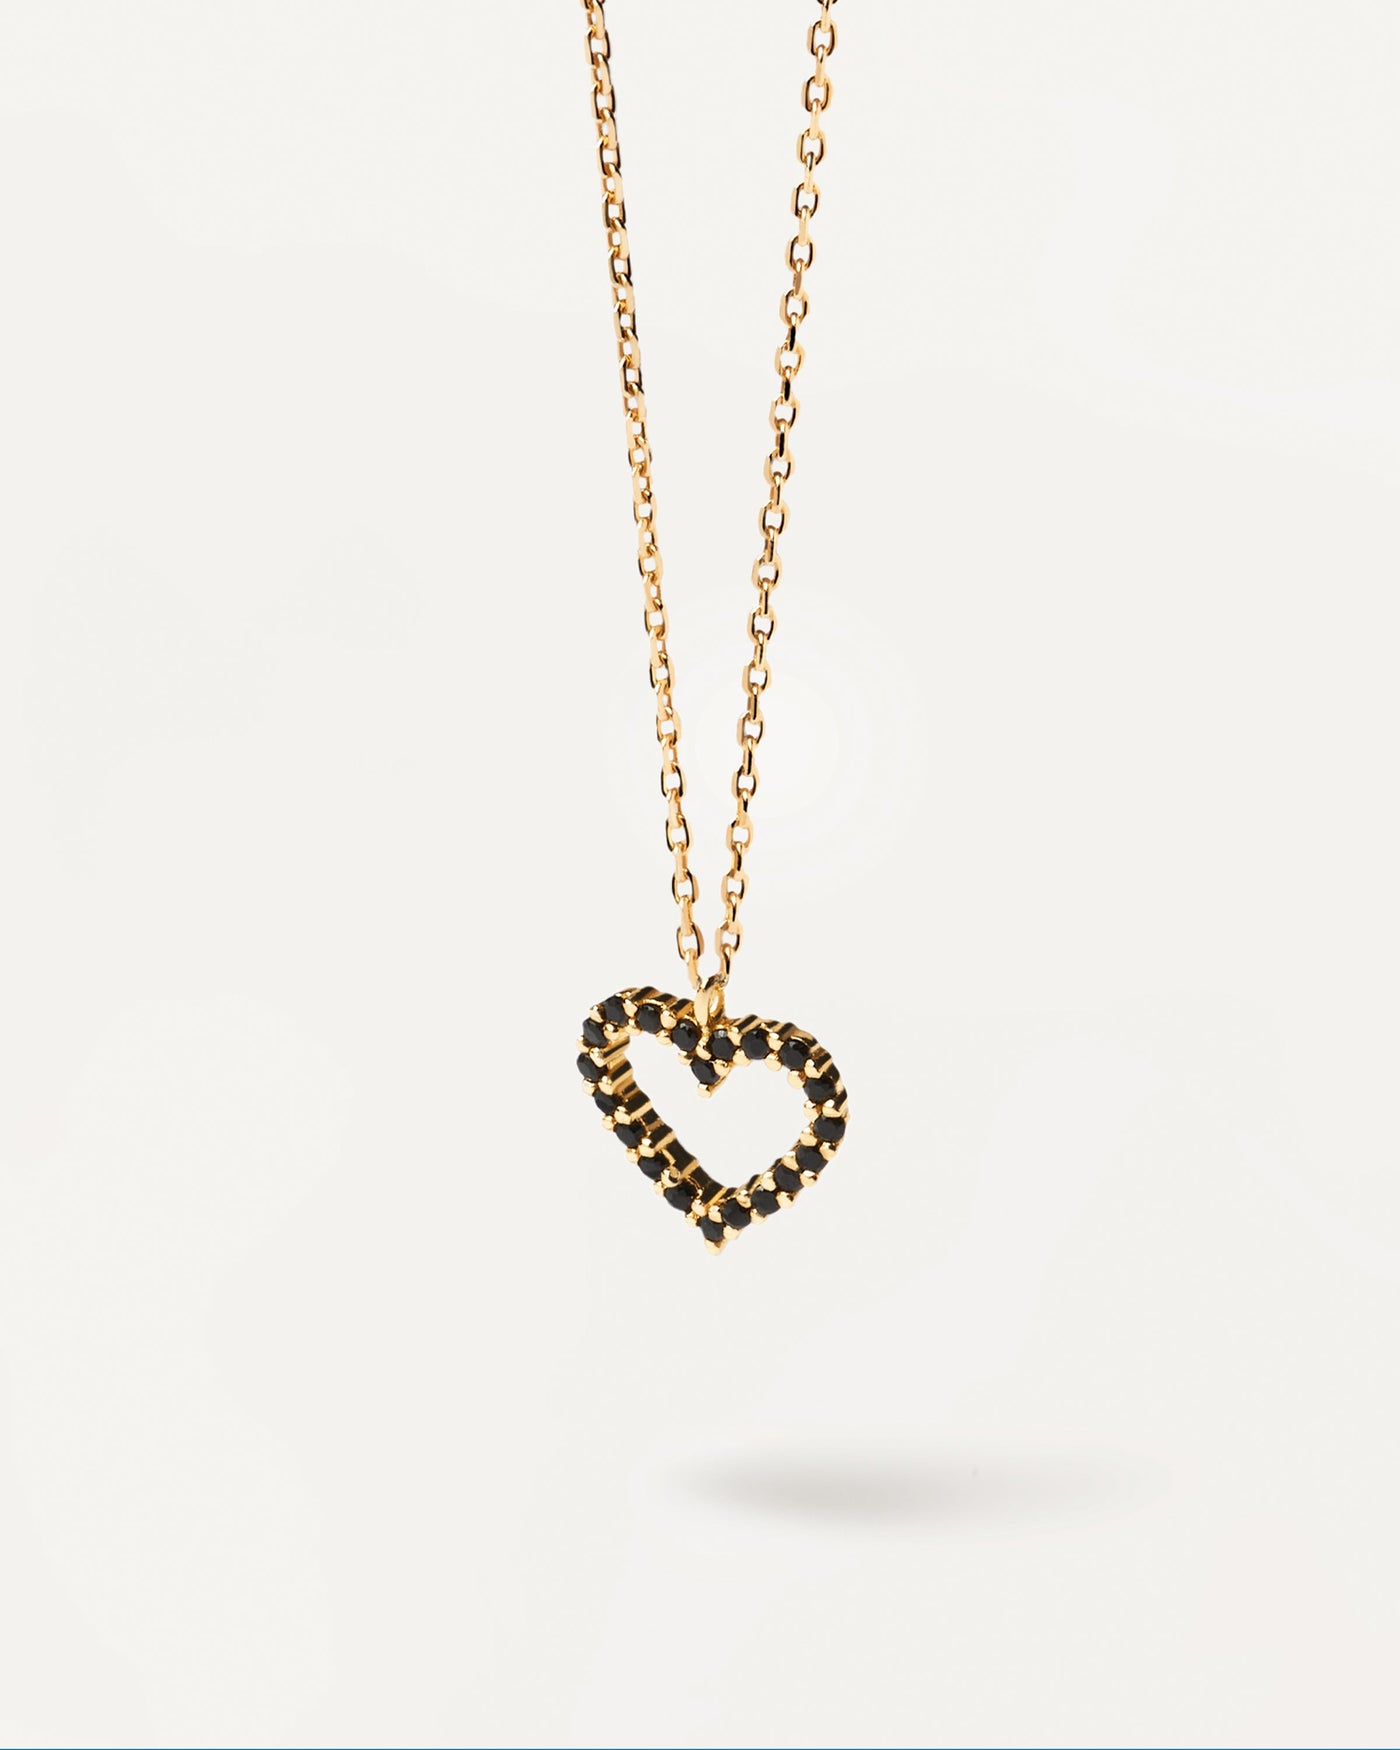 2023 Selection | Black Heart Necklace Gold. Get the latest arrival from PDPAOLA. Place your order safely and get this Best Seller. Free Shipping over 40€